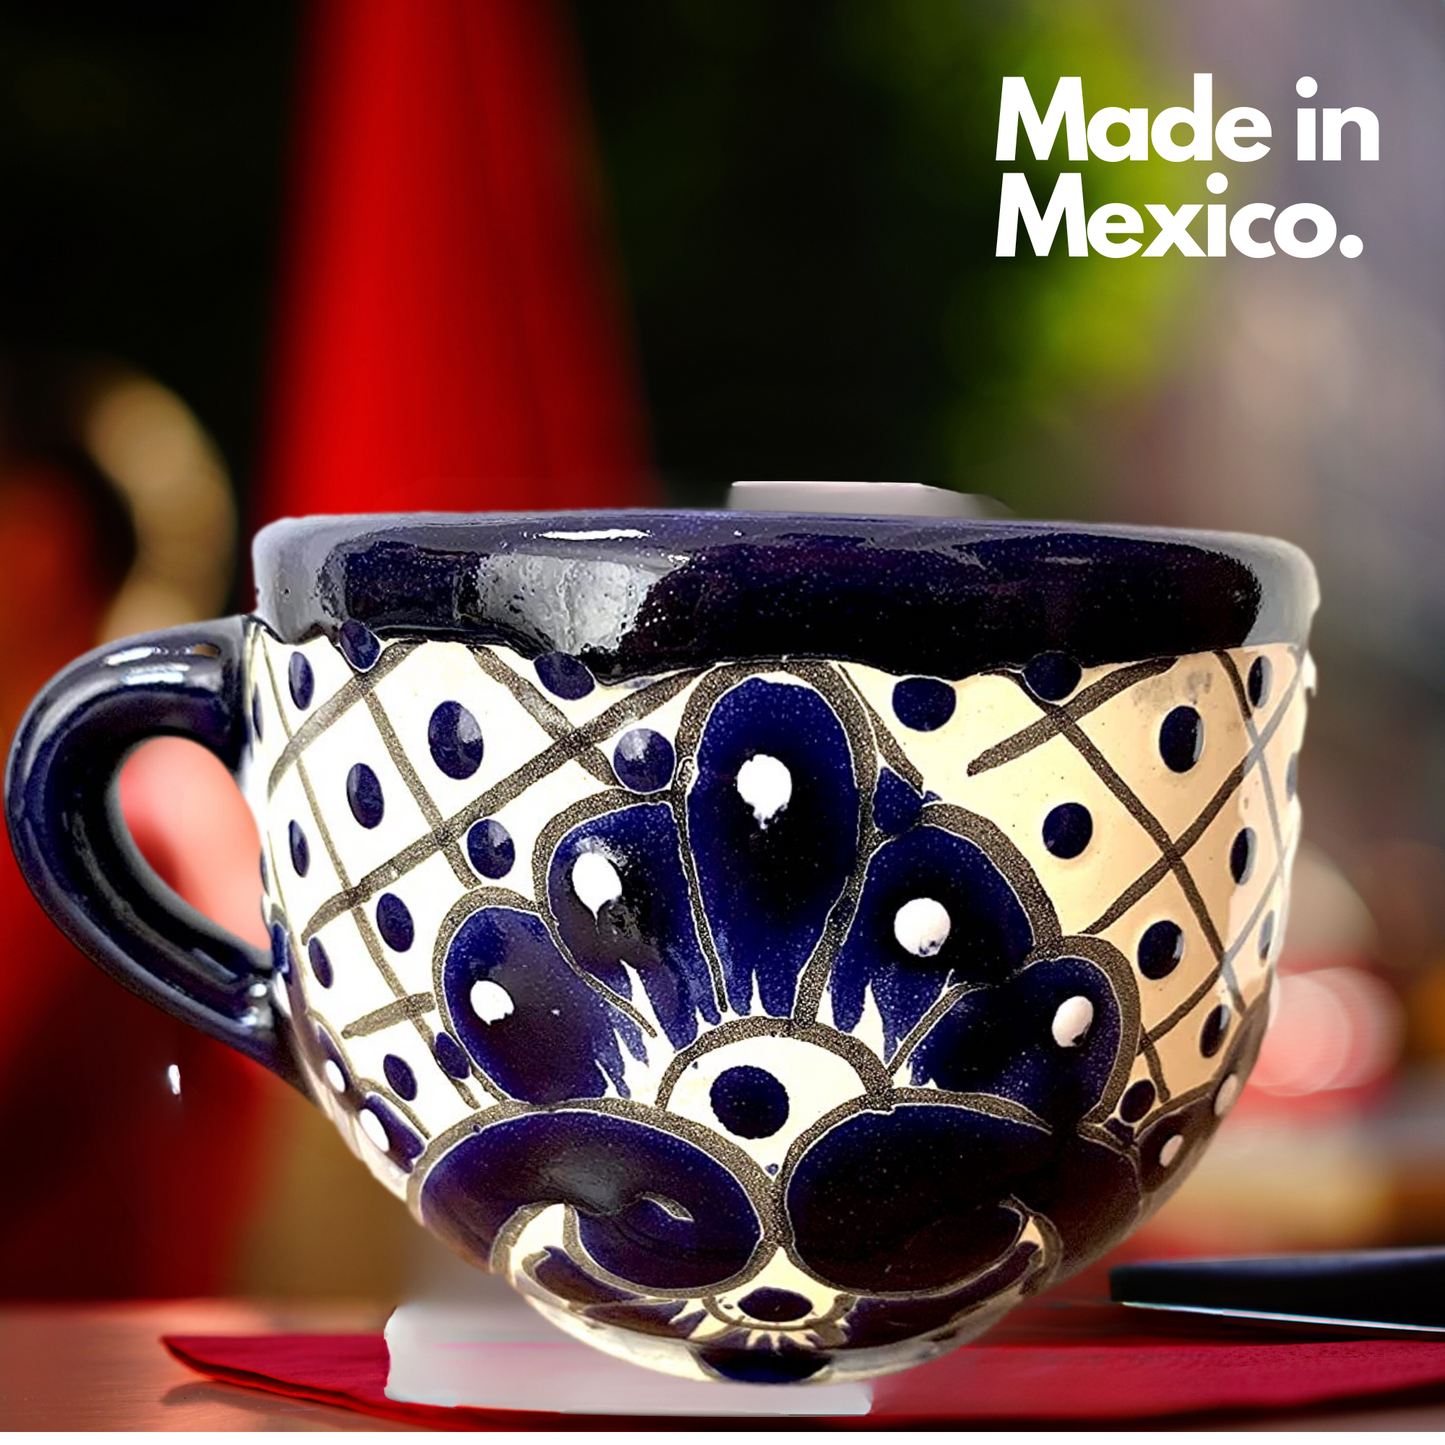 made in mexico Hand Painted Wide Mouth Mug in Blue and White - Authentic Mexican Pottery by Casa Fiesta Designs.